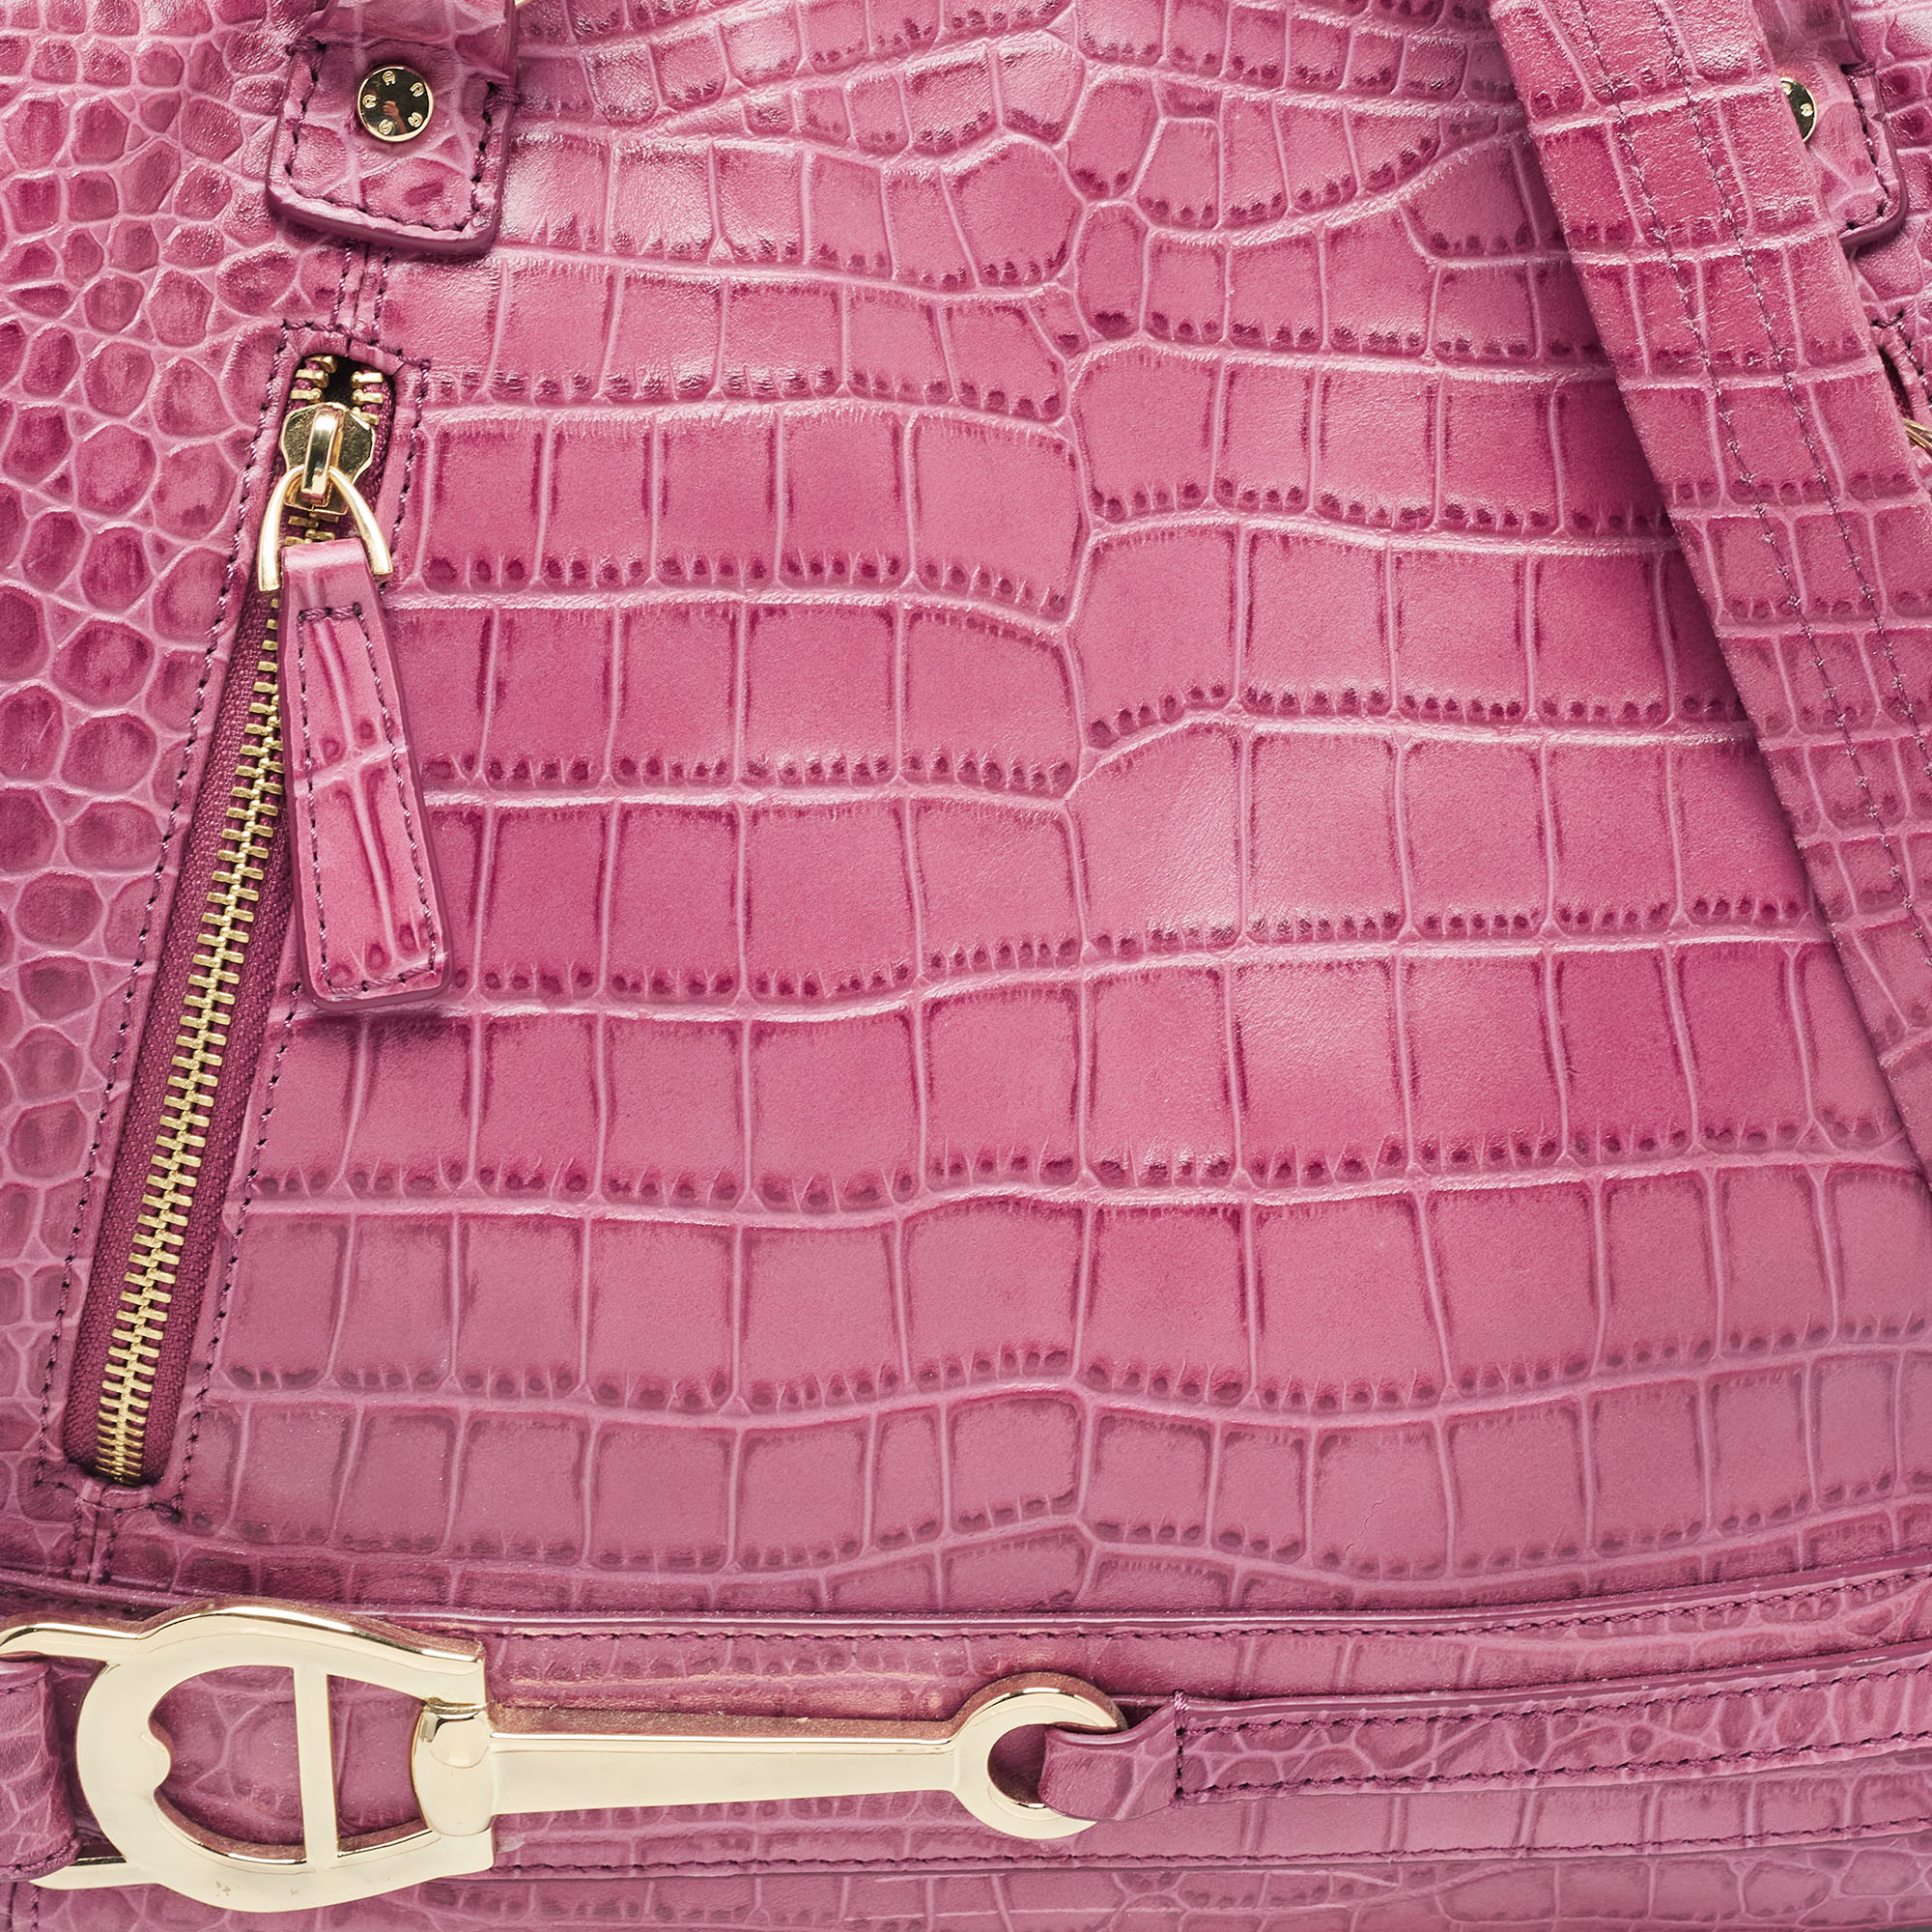 Aigner Pink Croc Embossed Leather Double Zipped Satchel